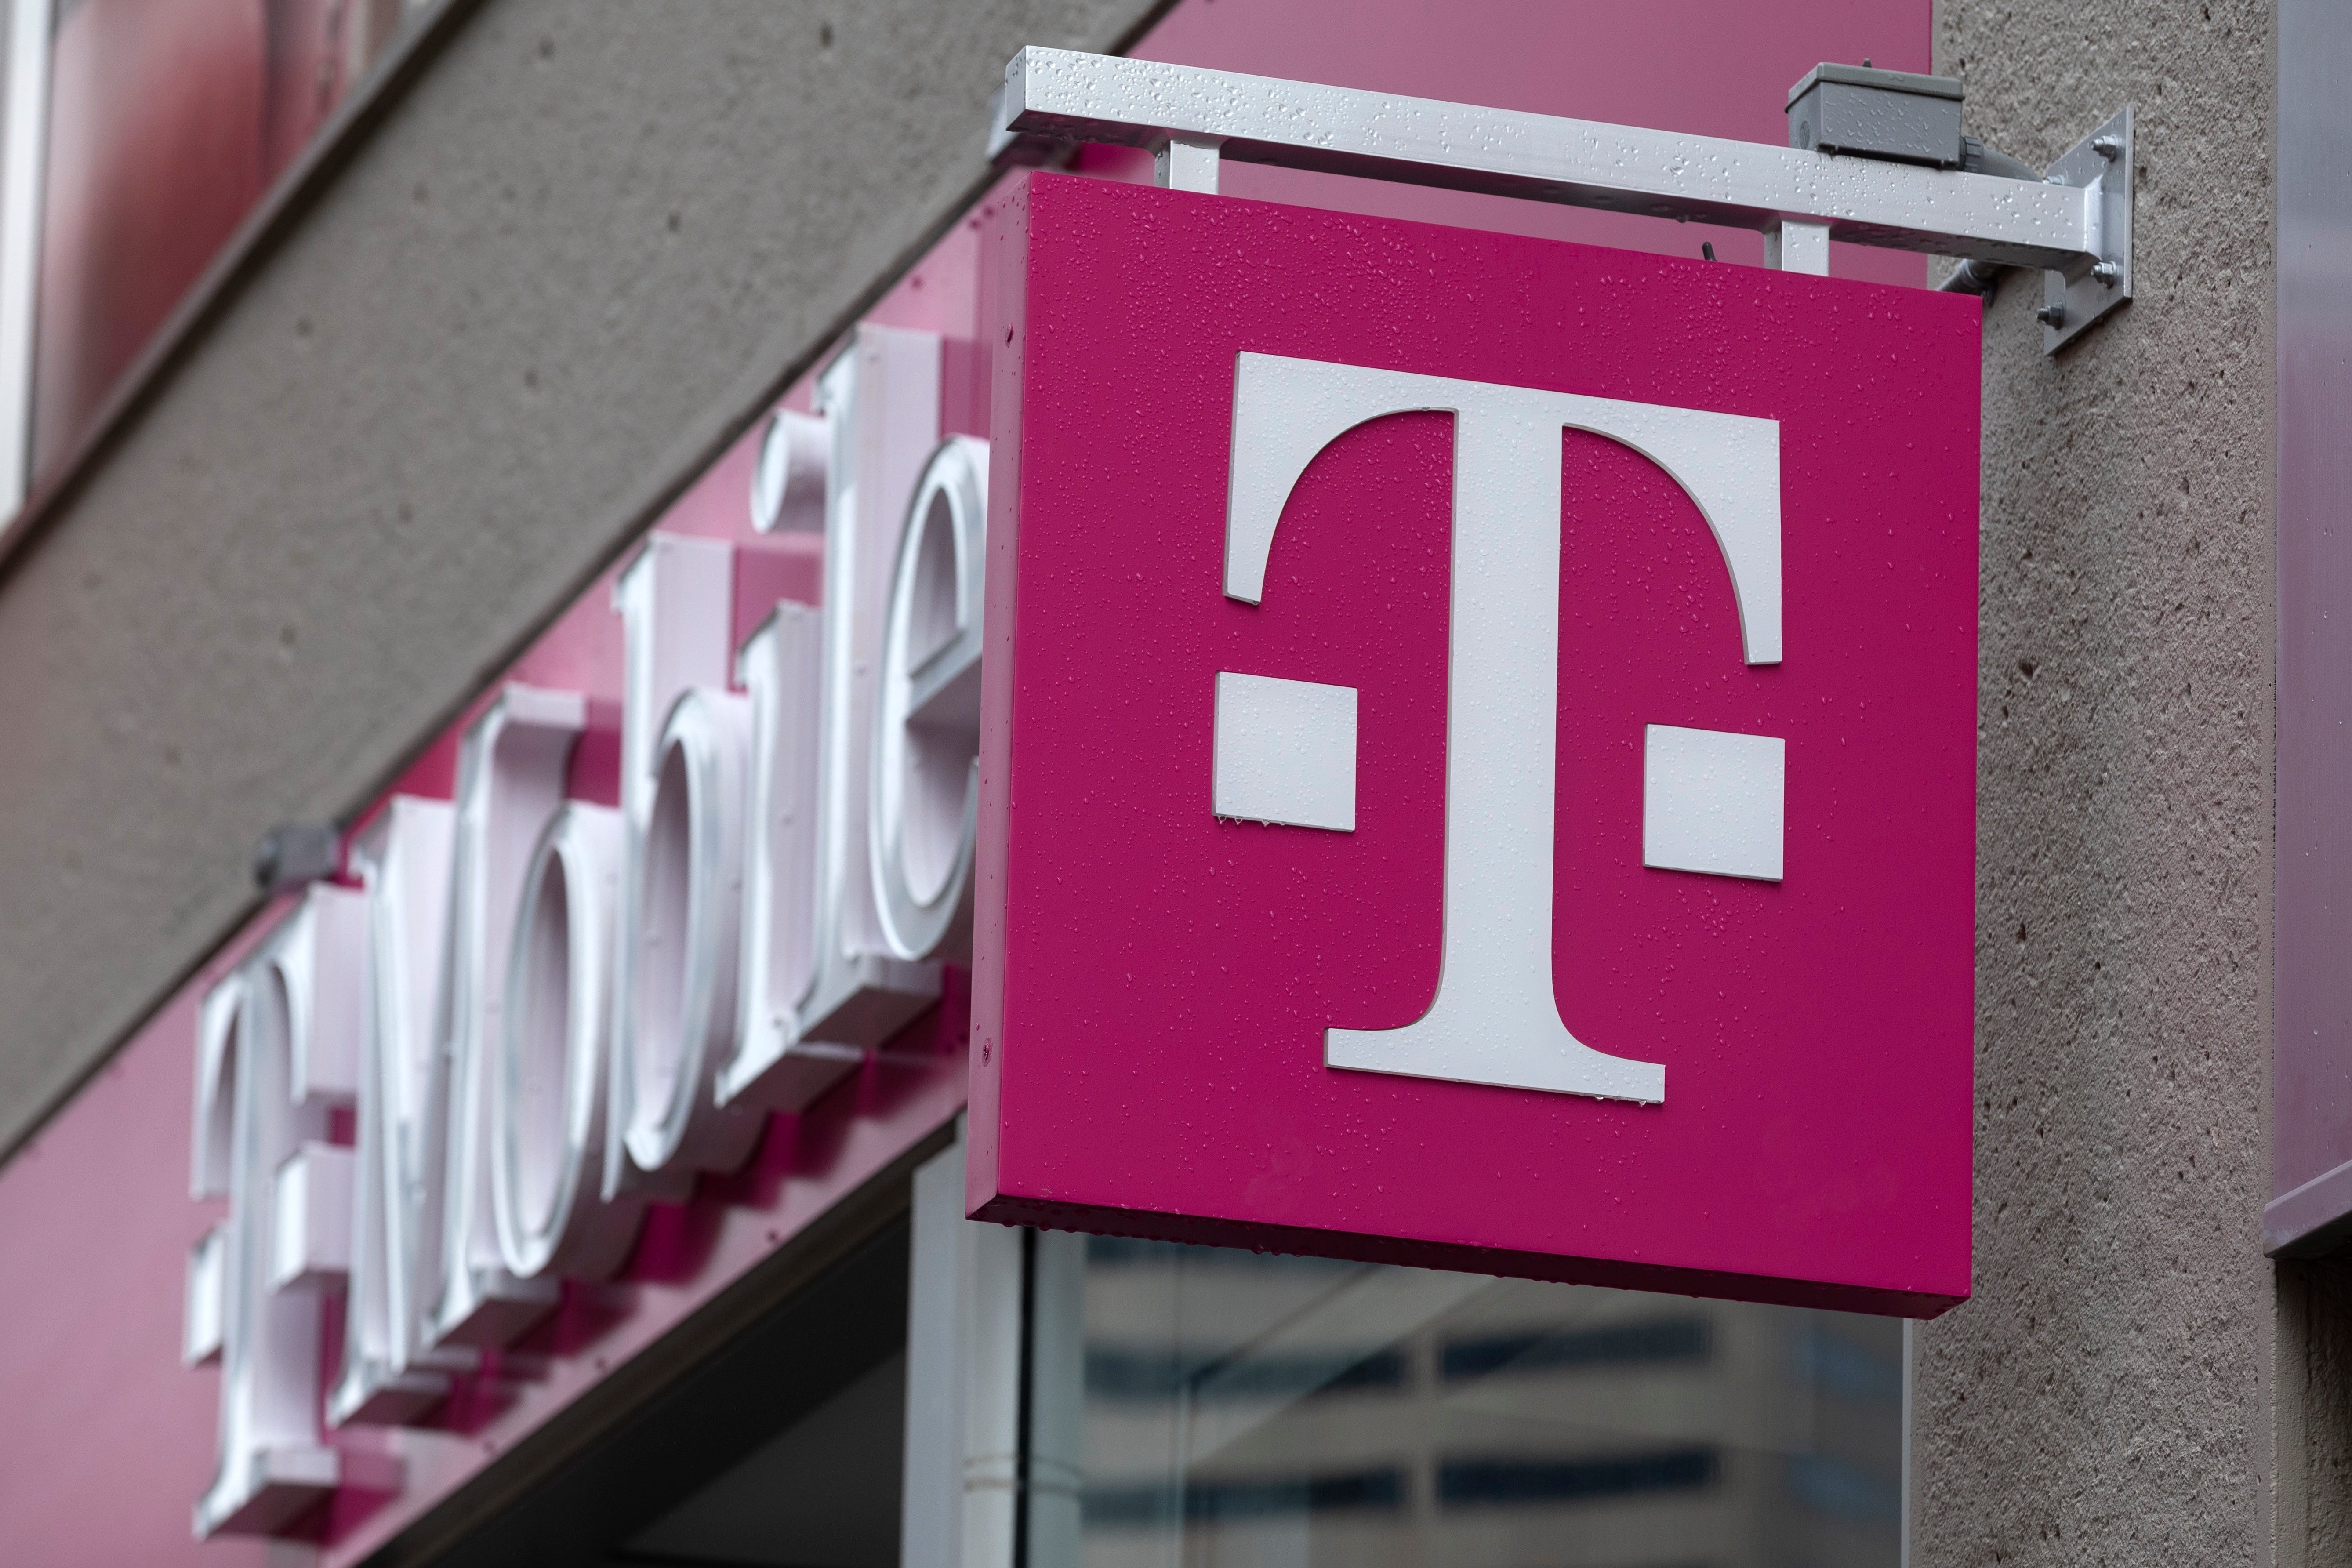 In latest T-Mobile hack, 37 million customers have personal data stolen, company says